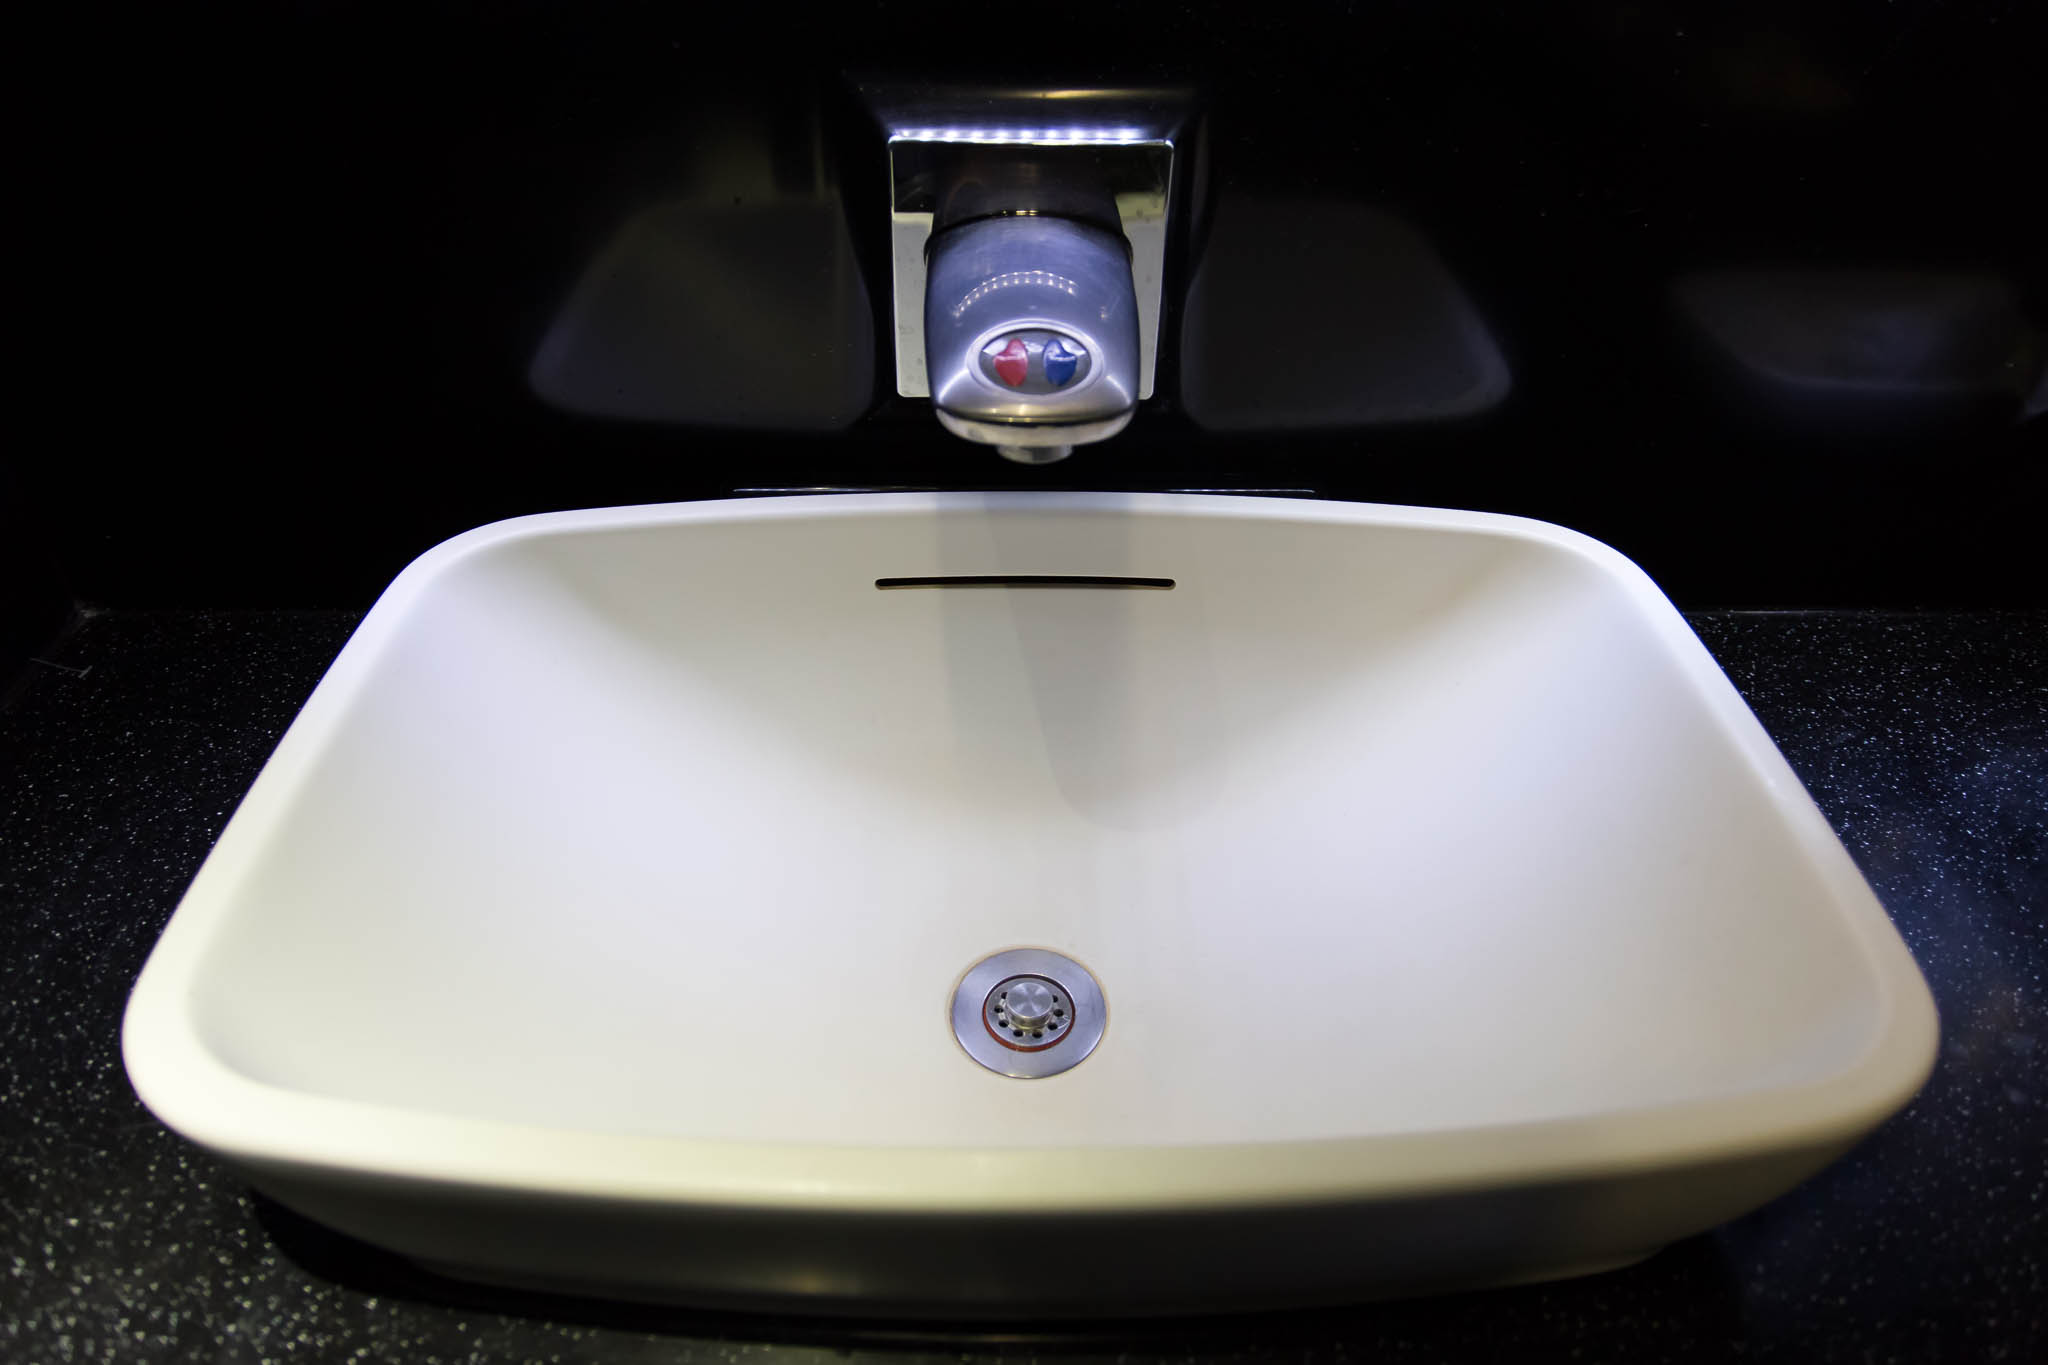 a white sink with a faucet